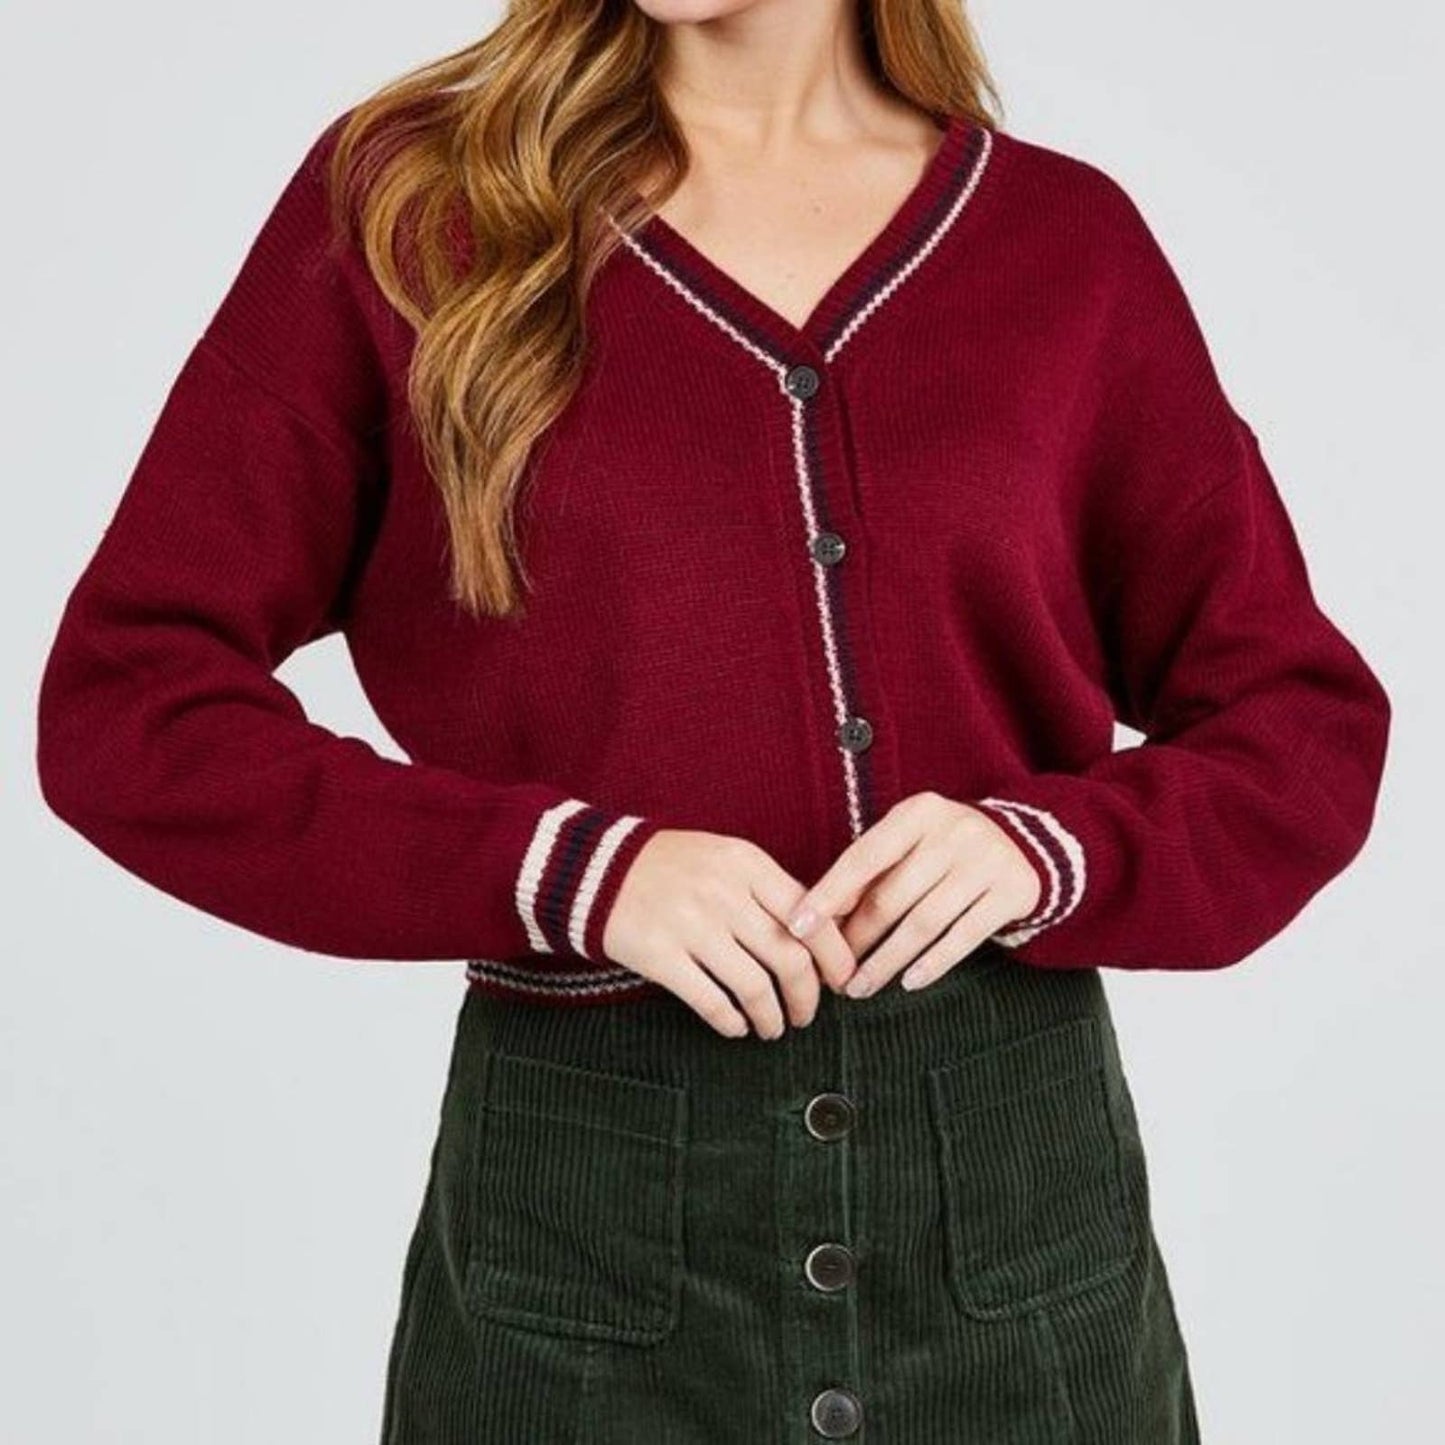 College Varsity cropped sweater NWT